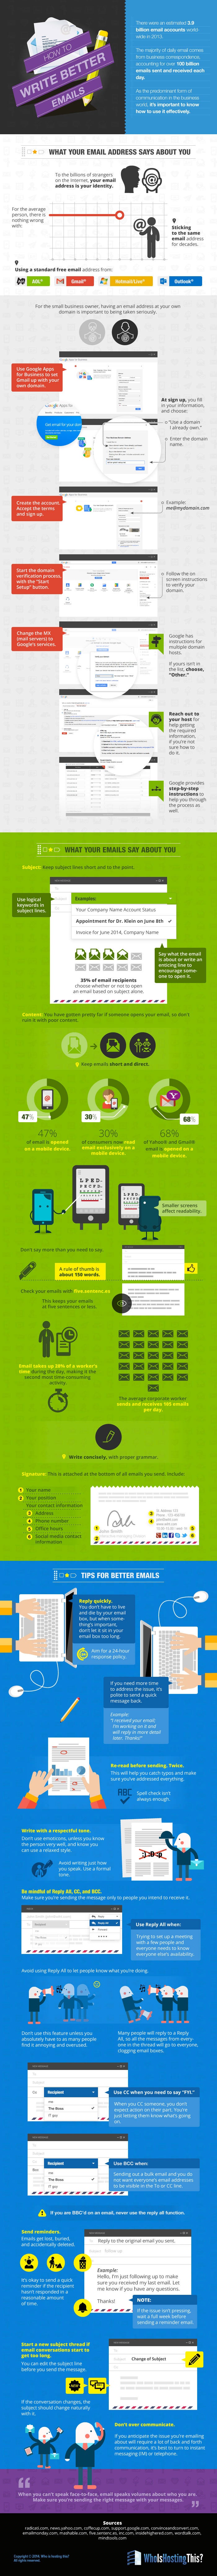 1410362476-how-write-better-emails-infographic.jpg